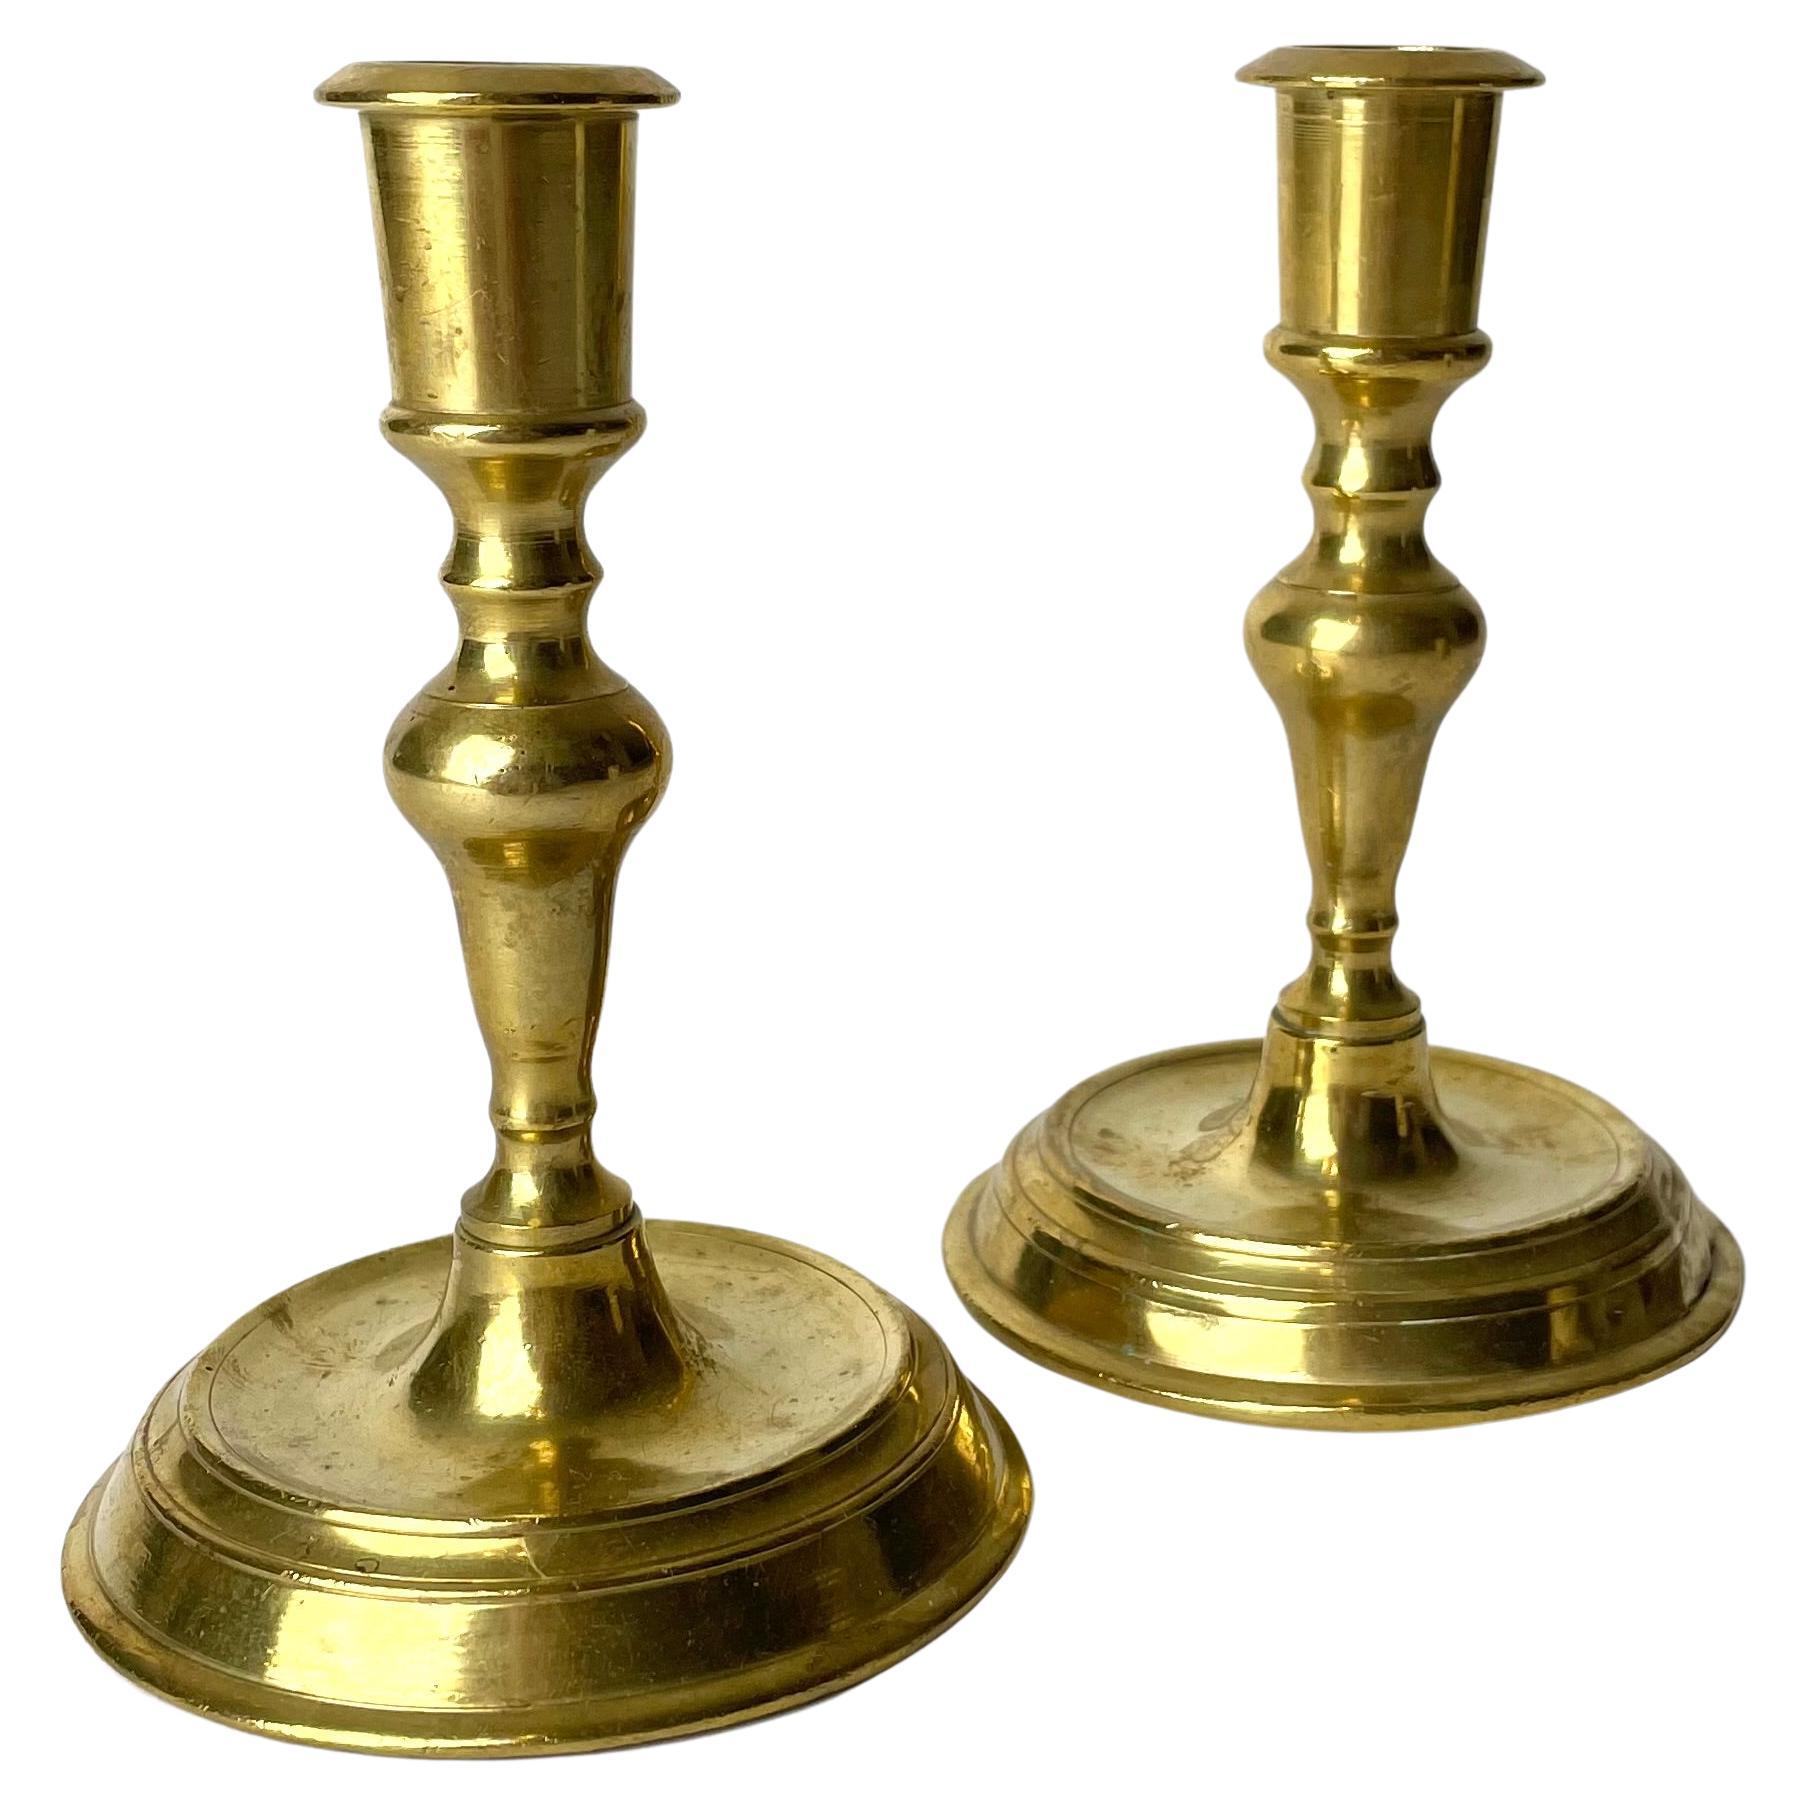 A Pair of Late Baroque Candlesticks, Brass, Early 18th Century